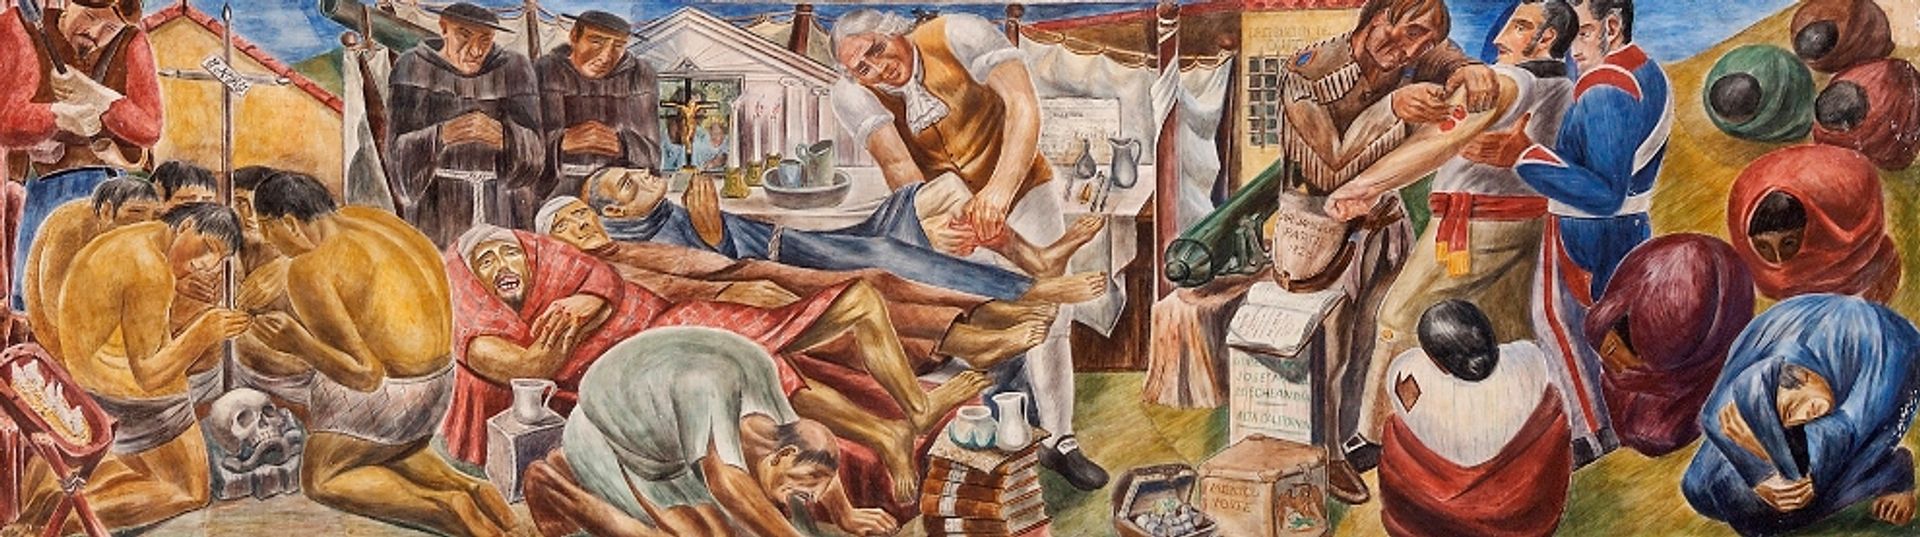 A panel from the mural series History of Medicine in California by Bernard Zakheim 